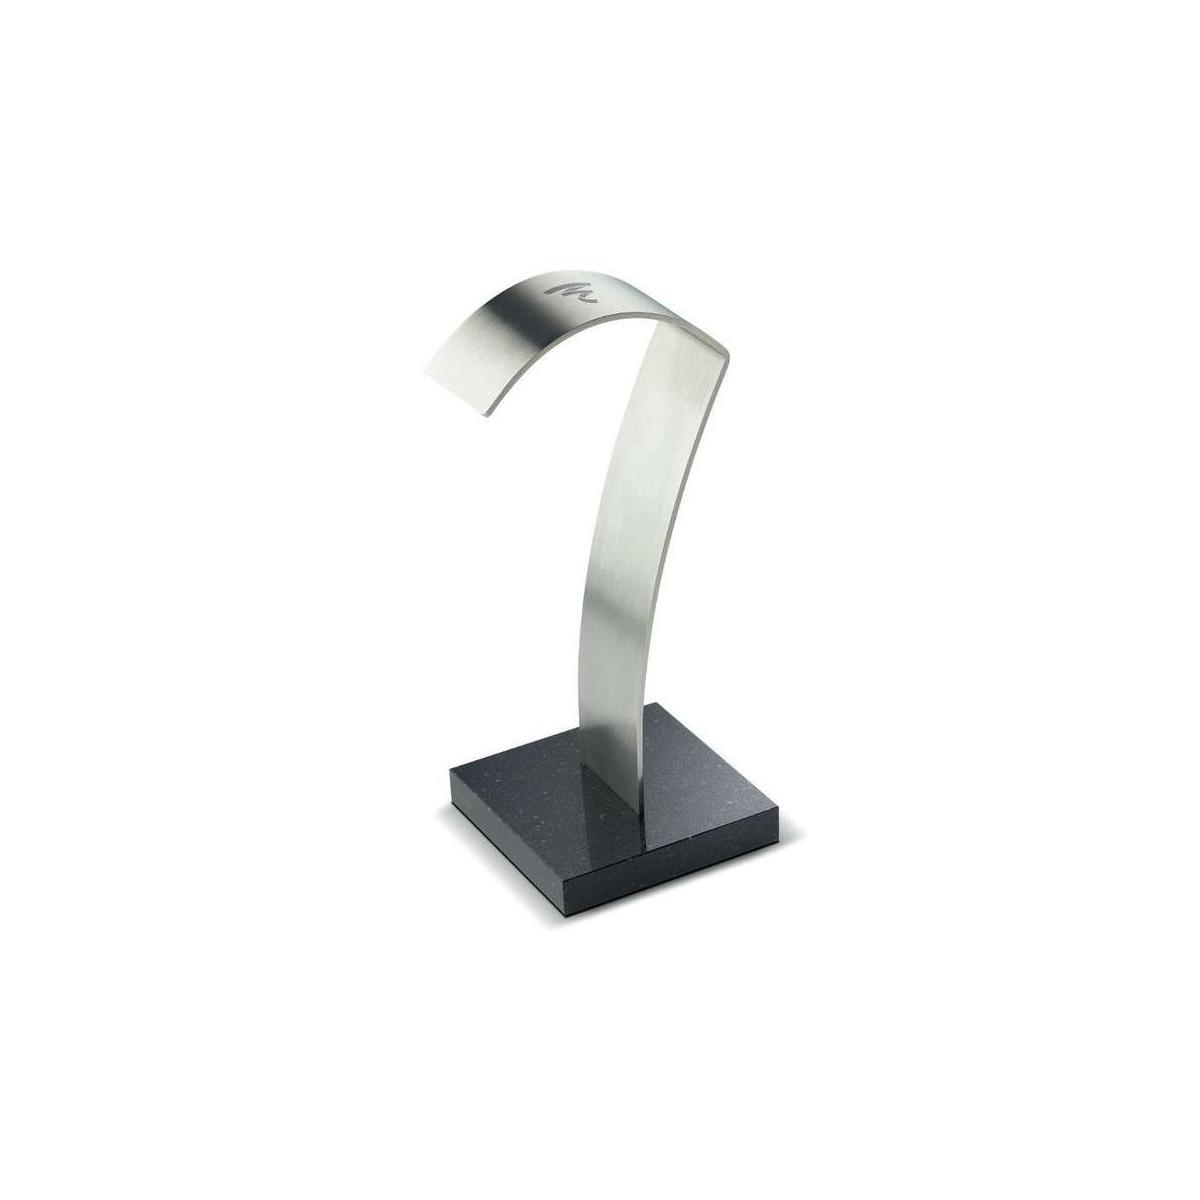 Image of Focal Stainless Steel Headphone Stand for Focal Elear and Utopia Headphones